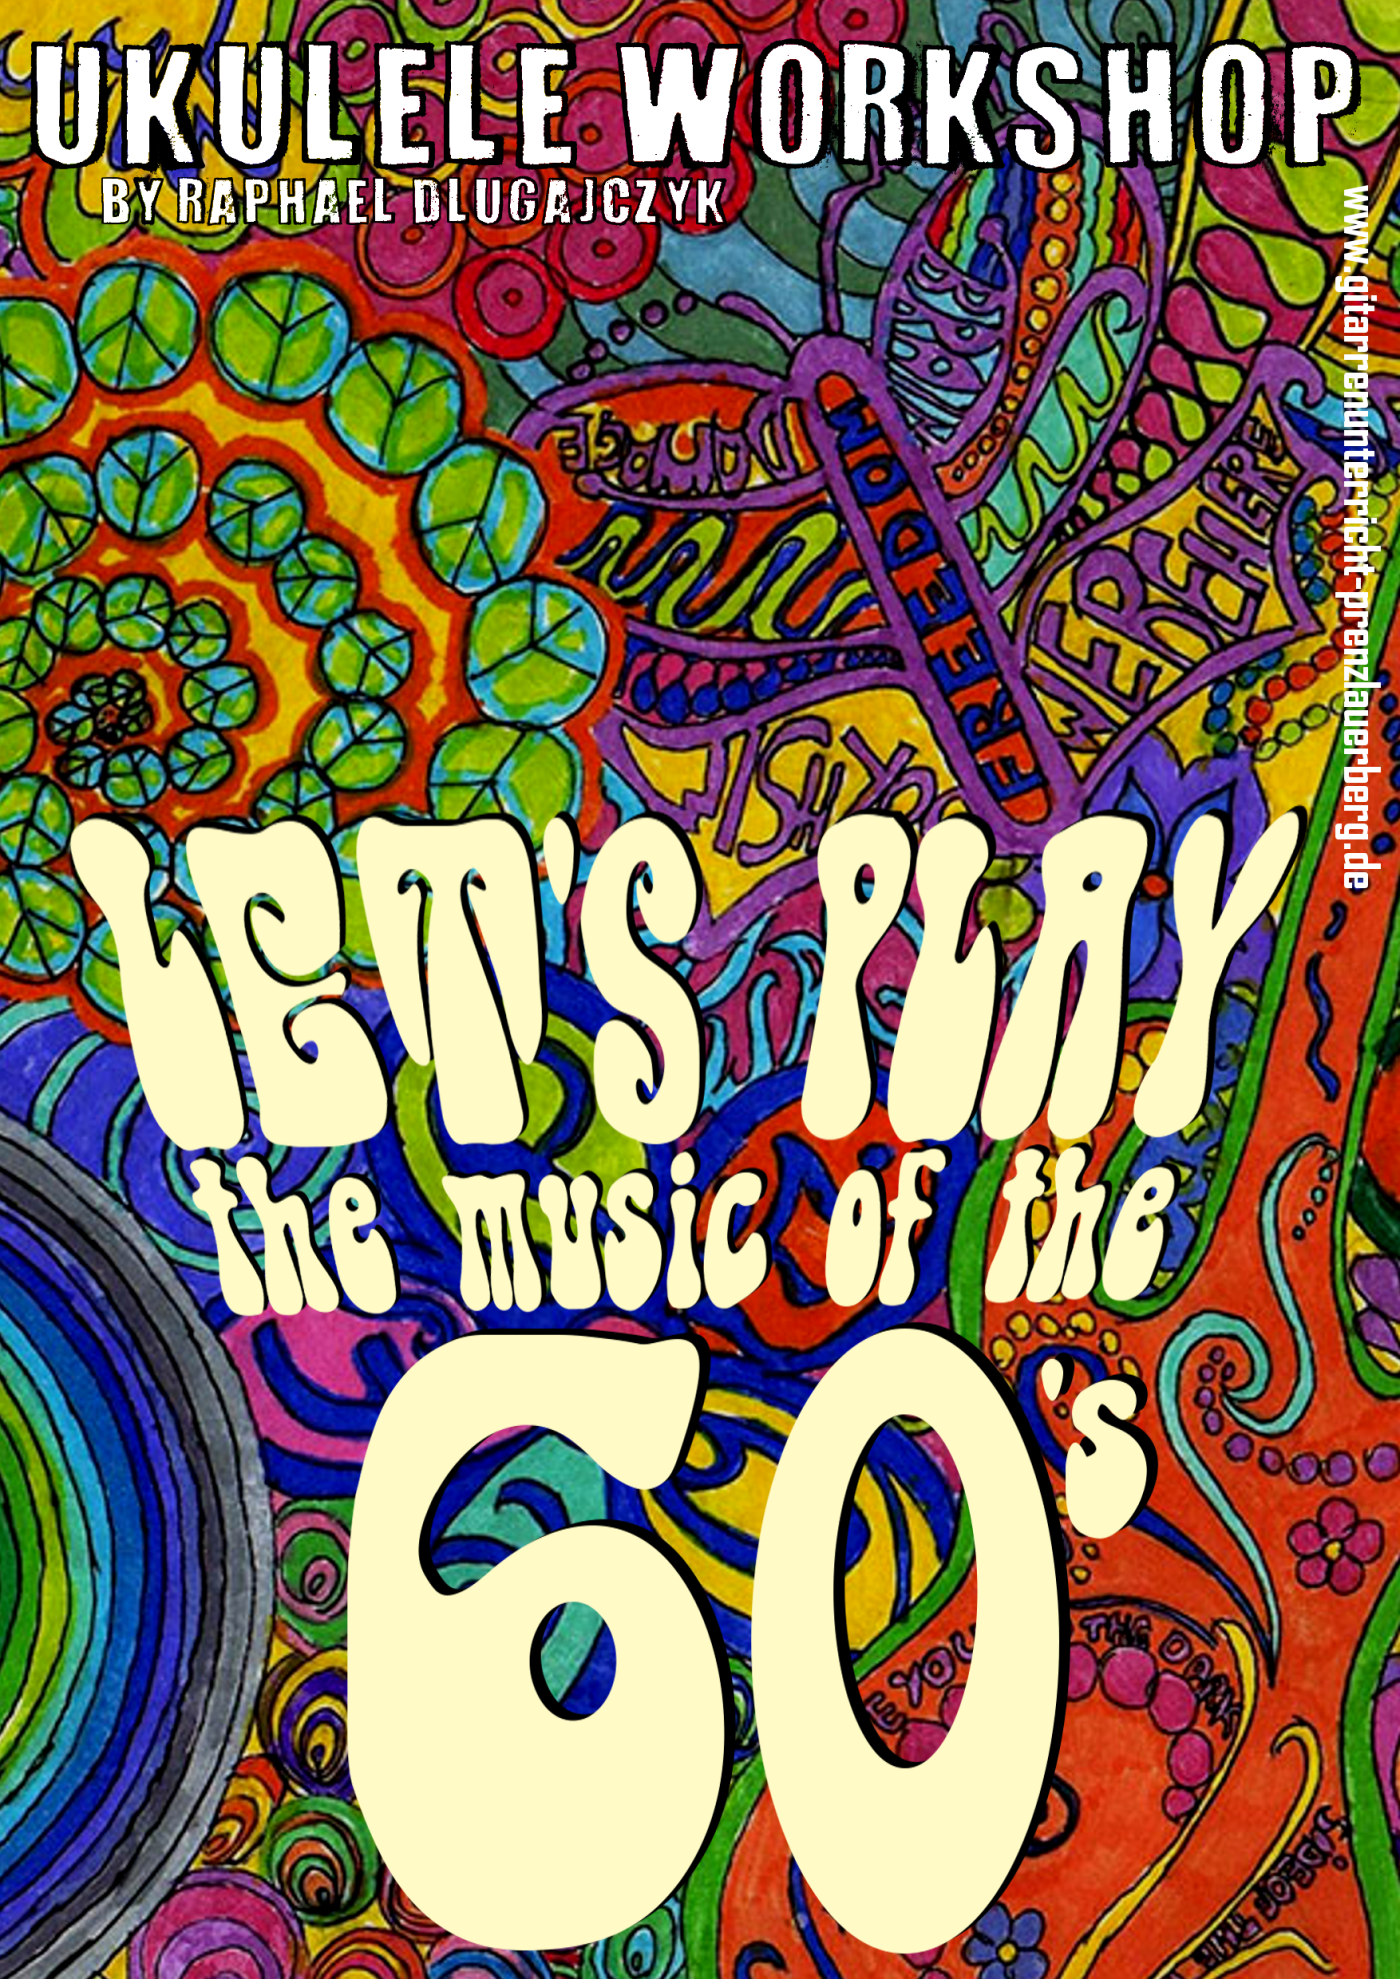 The music of the sixties